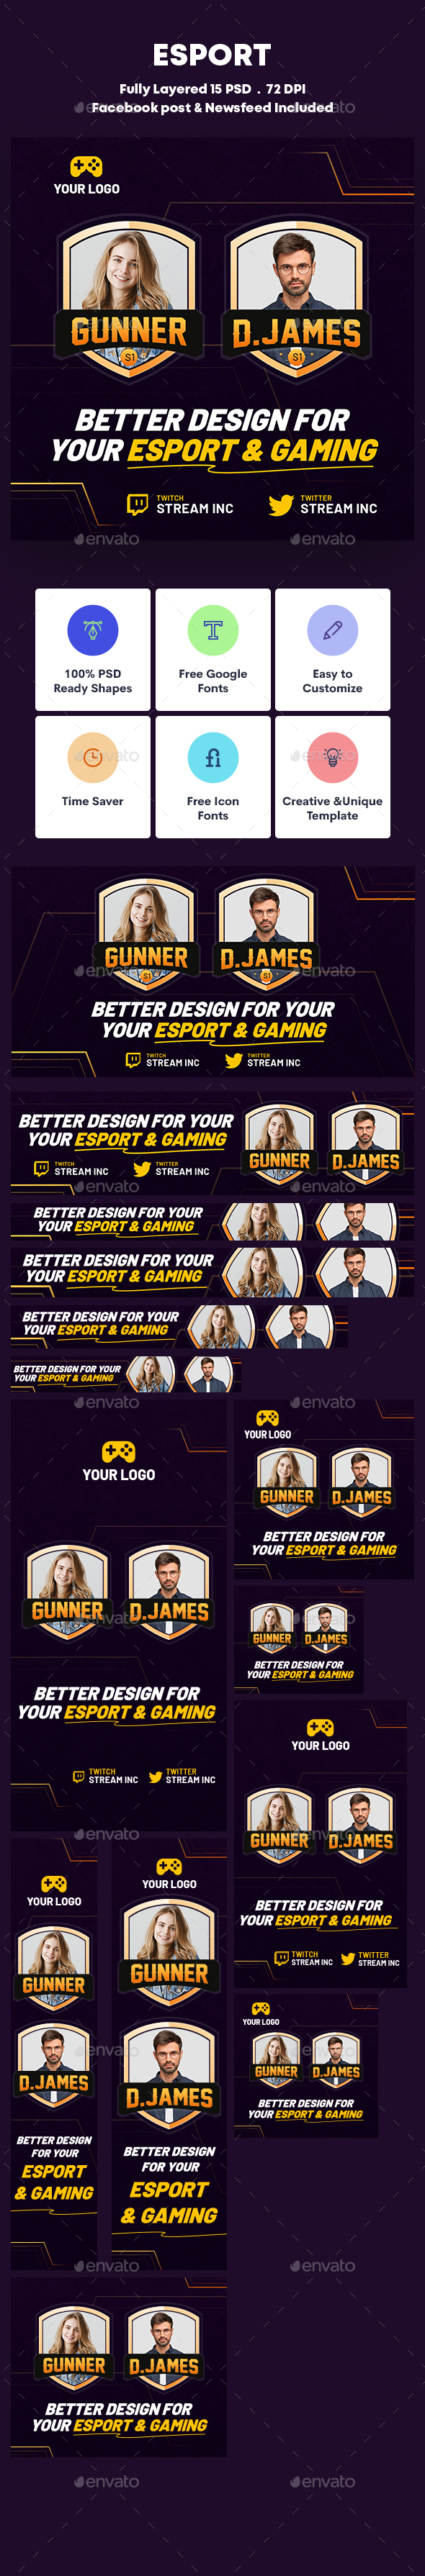 [DOWNLOAD]eSport Banners Ad